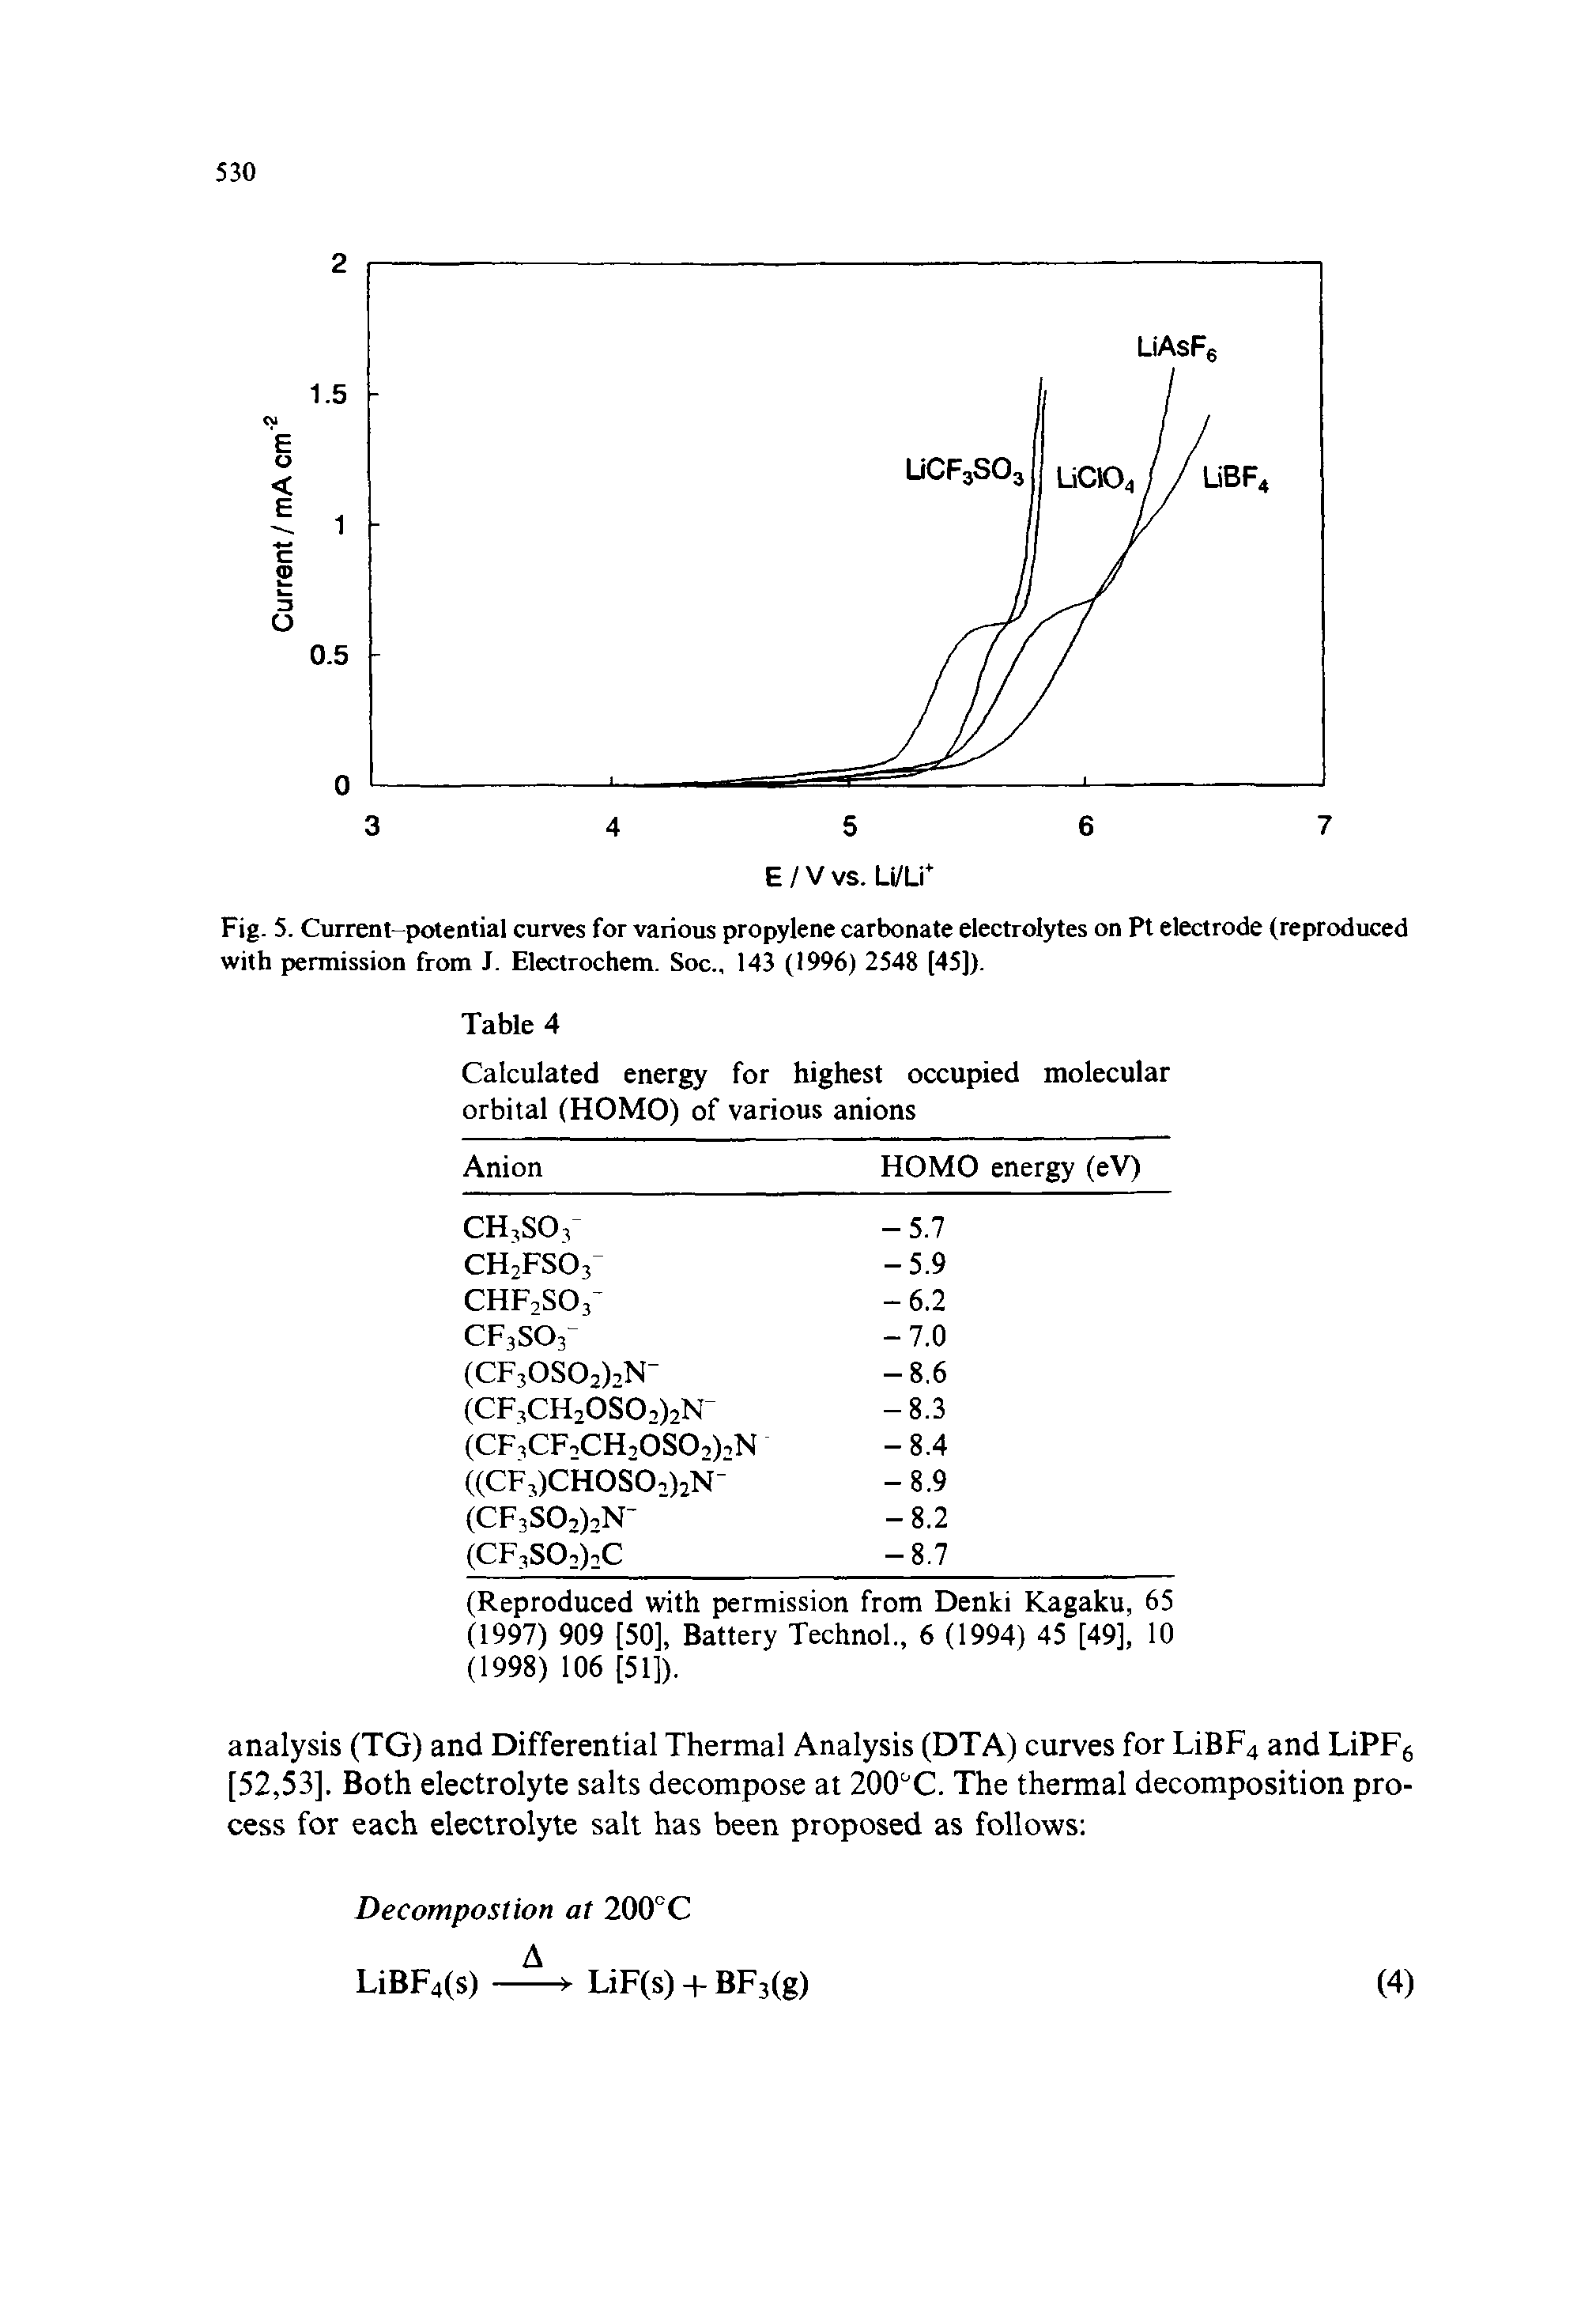 Fig. 5. Current-potential curves for various propylene carbonate electrolytes on Pt electrode (reproduced with permission from J. Electrochem. Soc., 143 (1996) 2548 [45]).